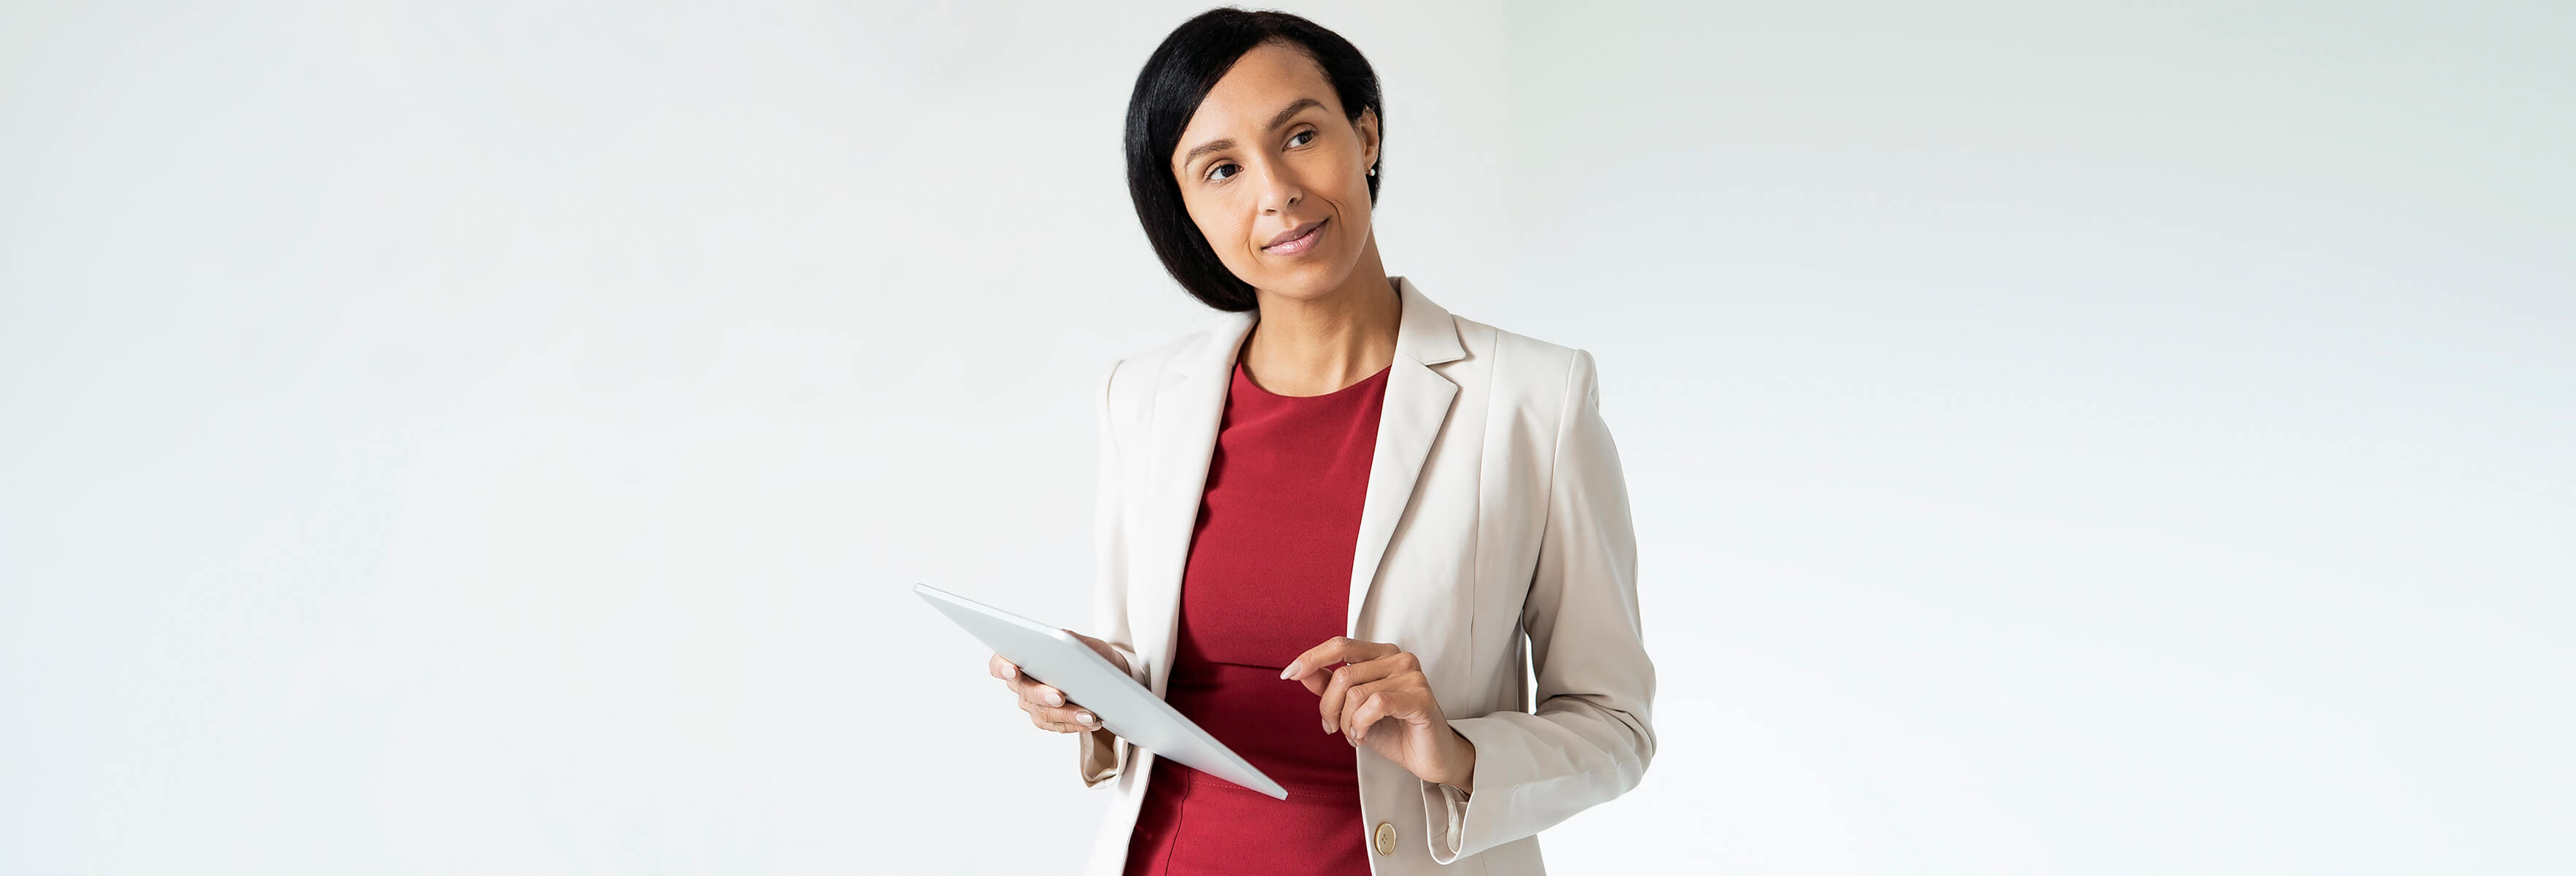 Smart dressed woman holding a tablet